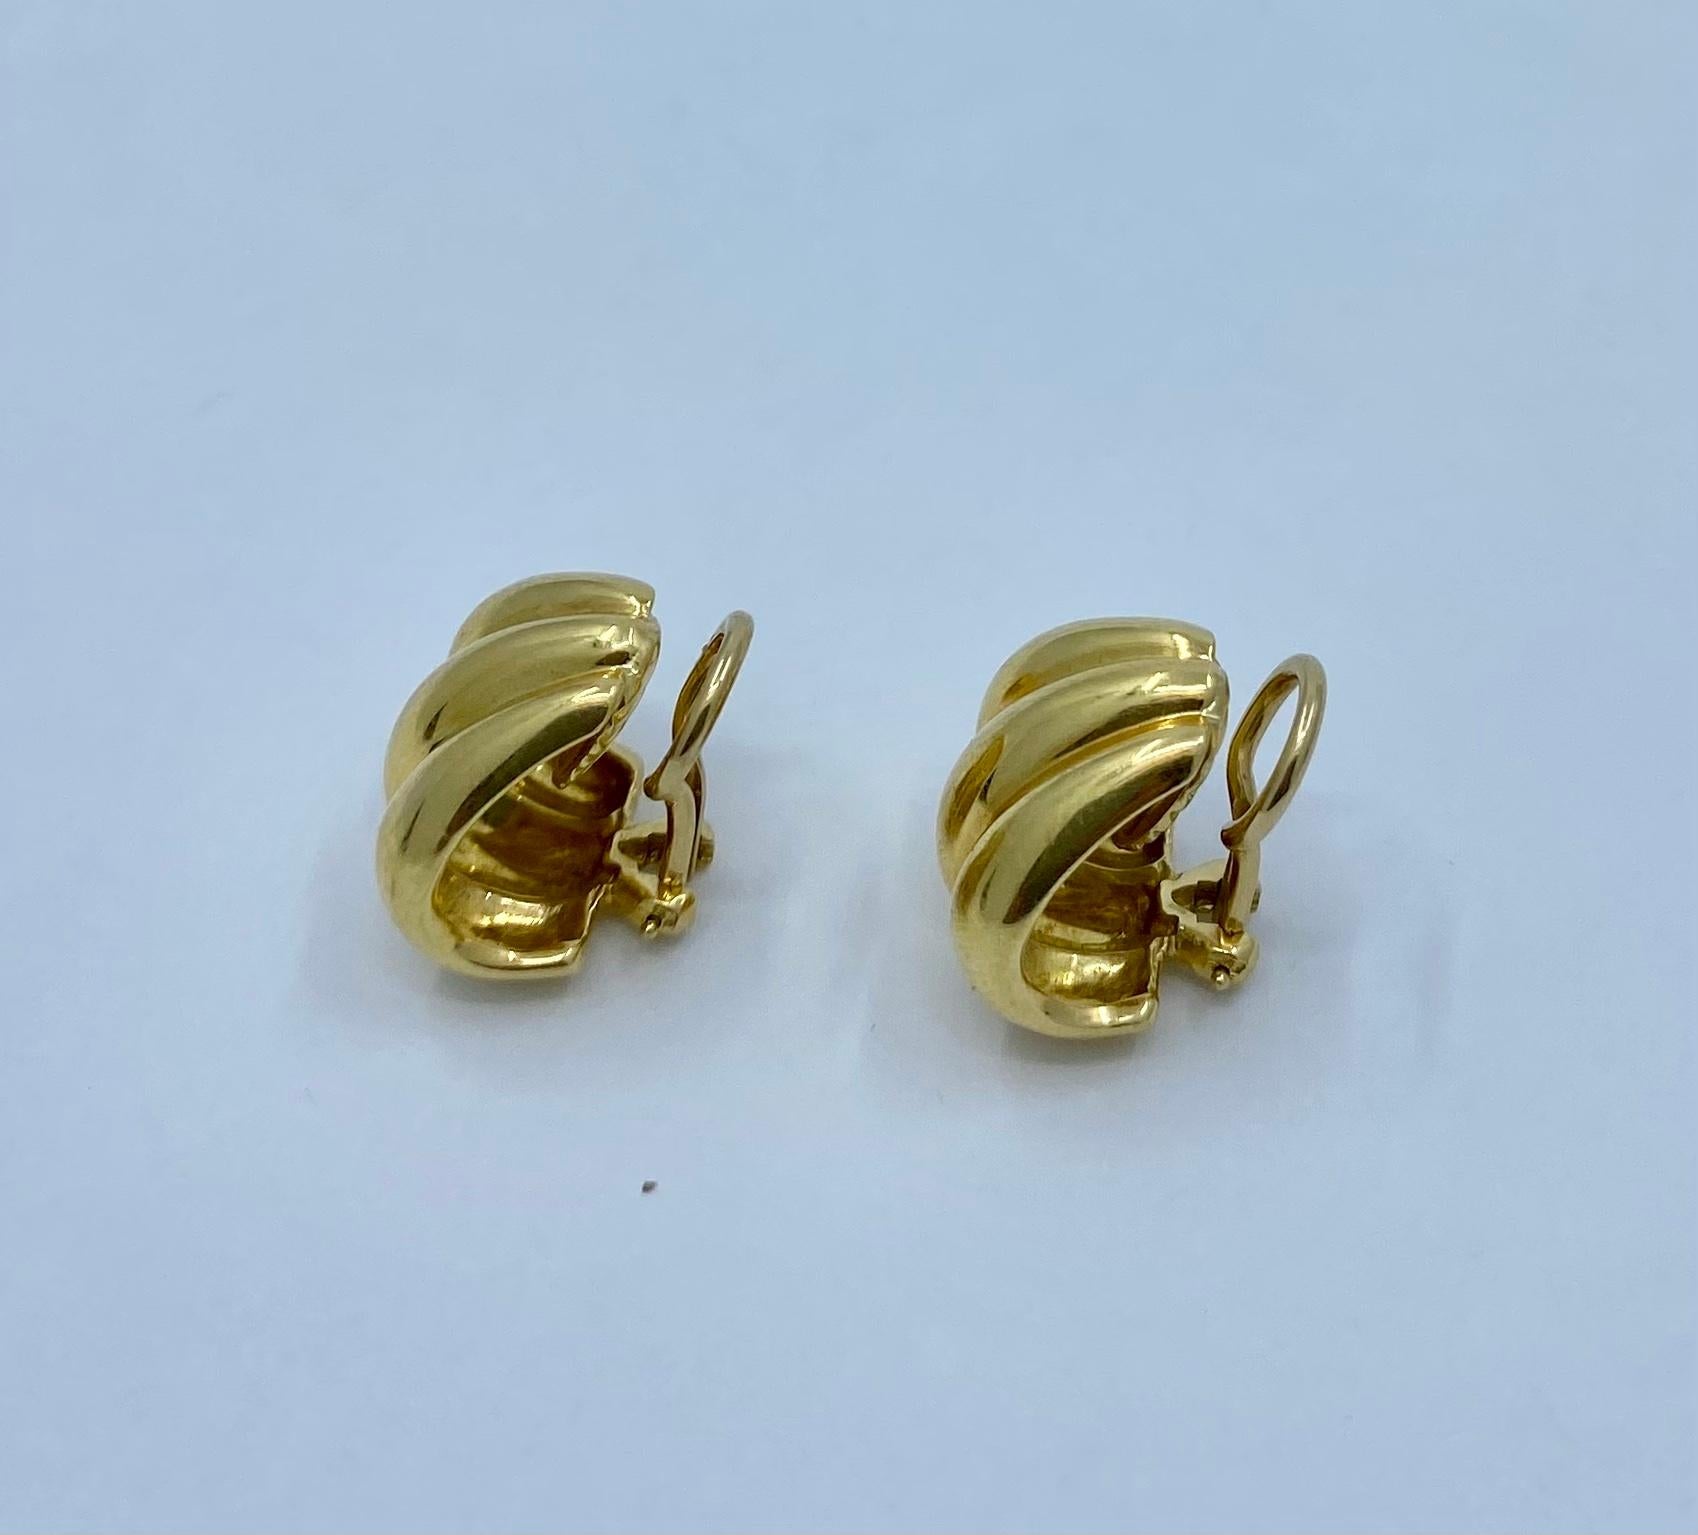 Designer: Tiffany & Co. 
Materials: 18K Yellow Gold
Weight: 10.4grams
Measurement: 9/16 inches long and 9/16 inches wide
Hallmarks: Tiffany & Co 750

A pair of Tiffany & Co. 18k gold small shell shape earrings.
The closure is clip-on.
These glossy